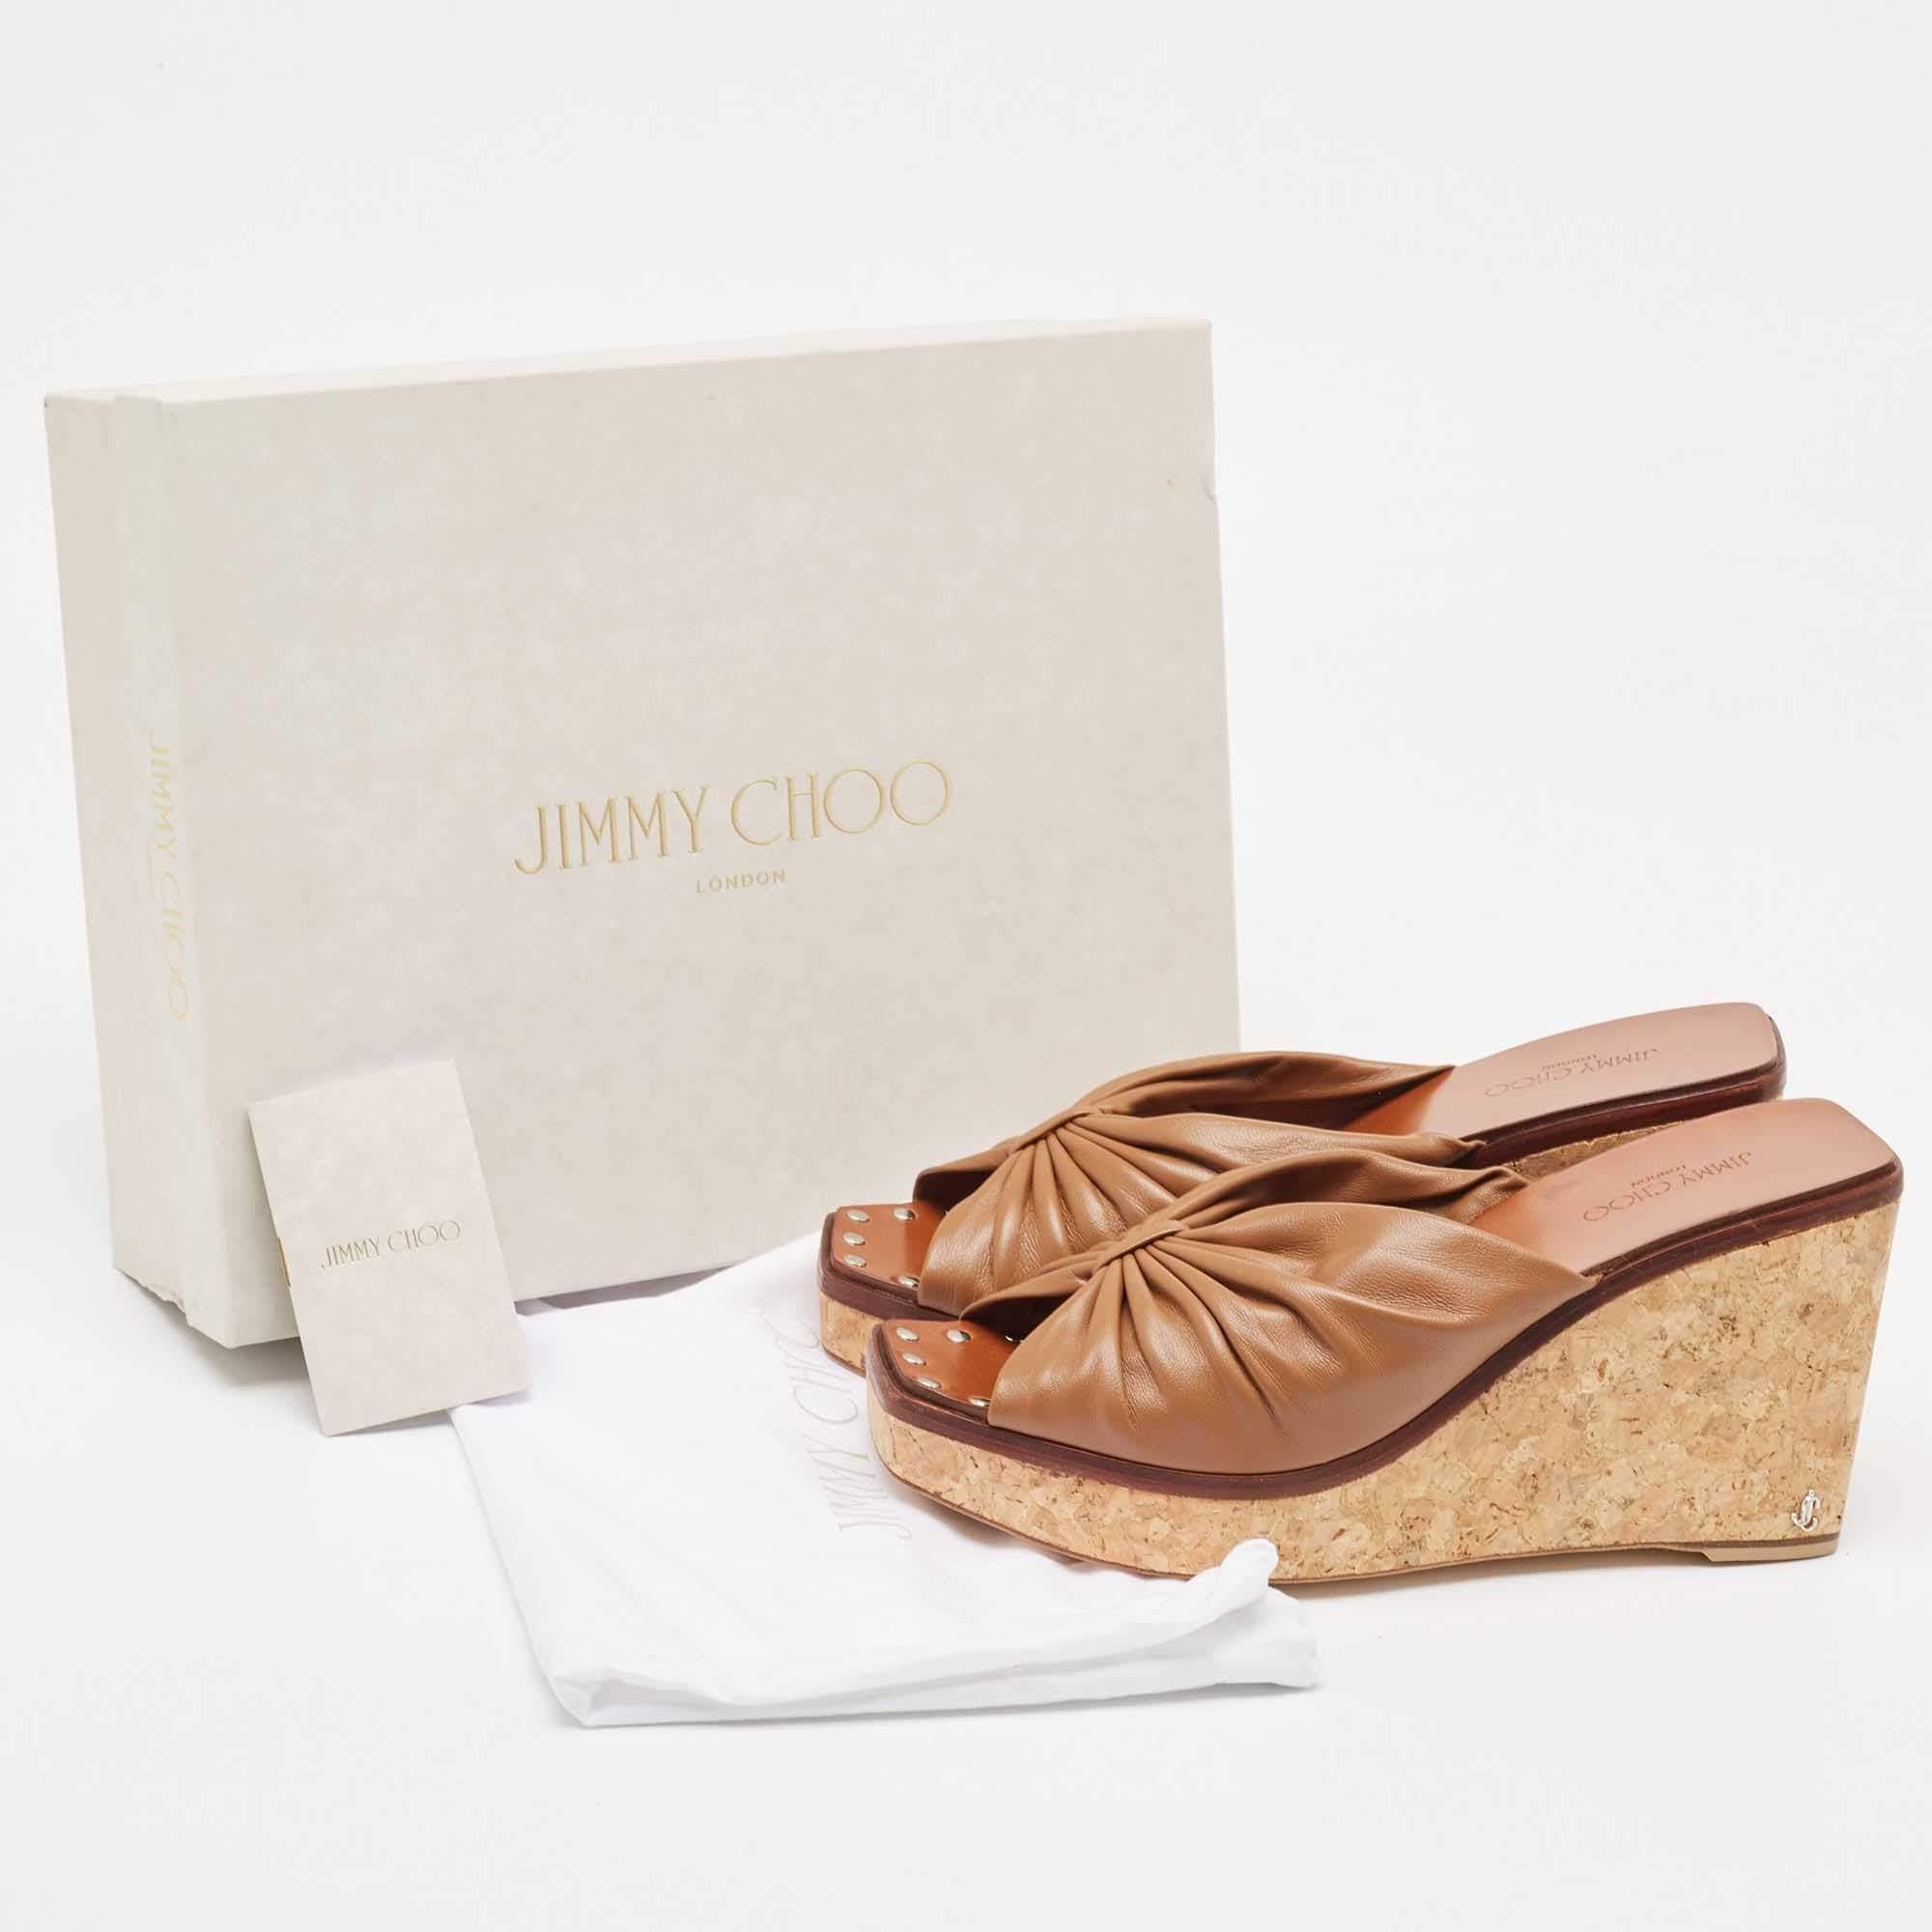 Jimmy Choo Brown Leather Wedge Sandals Size 39.5 5